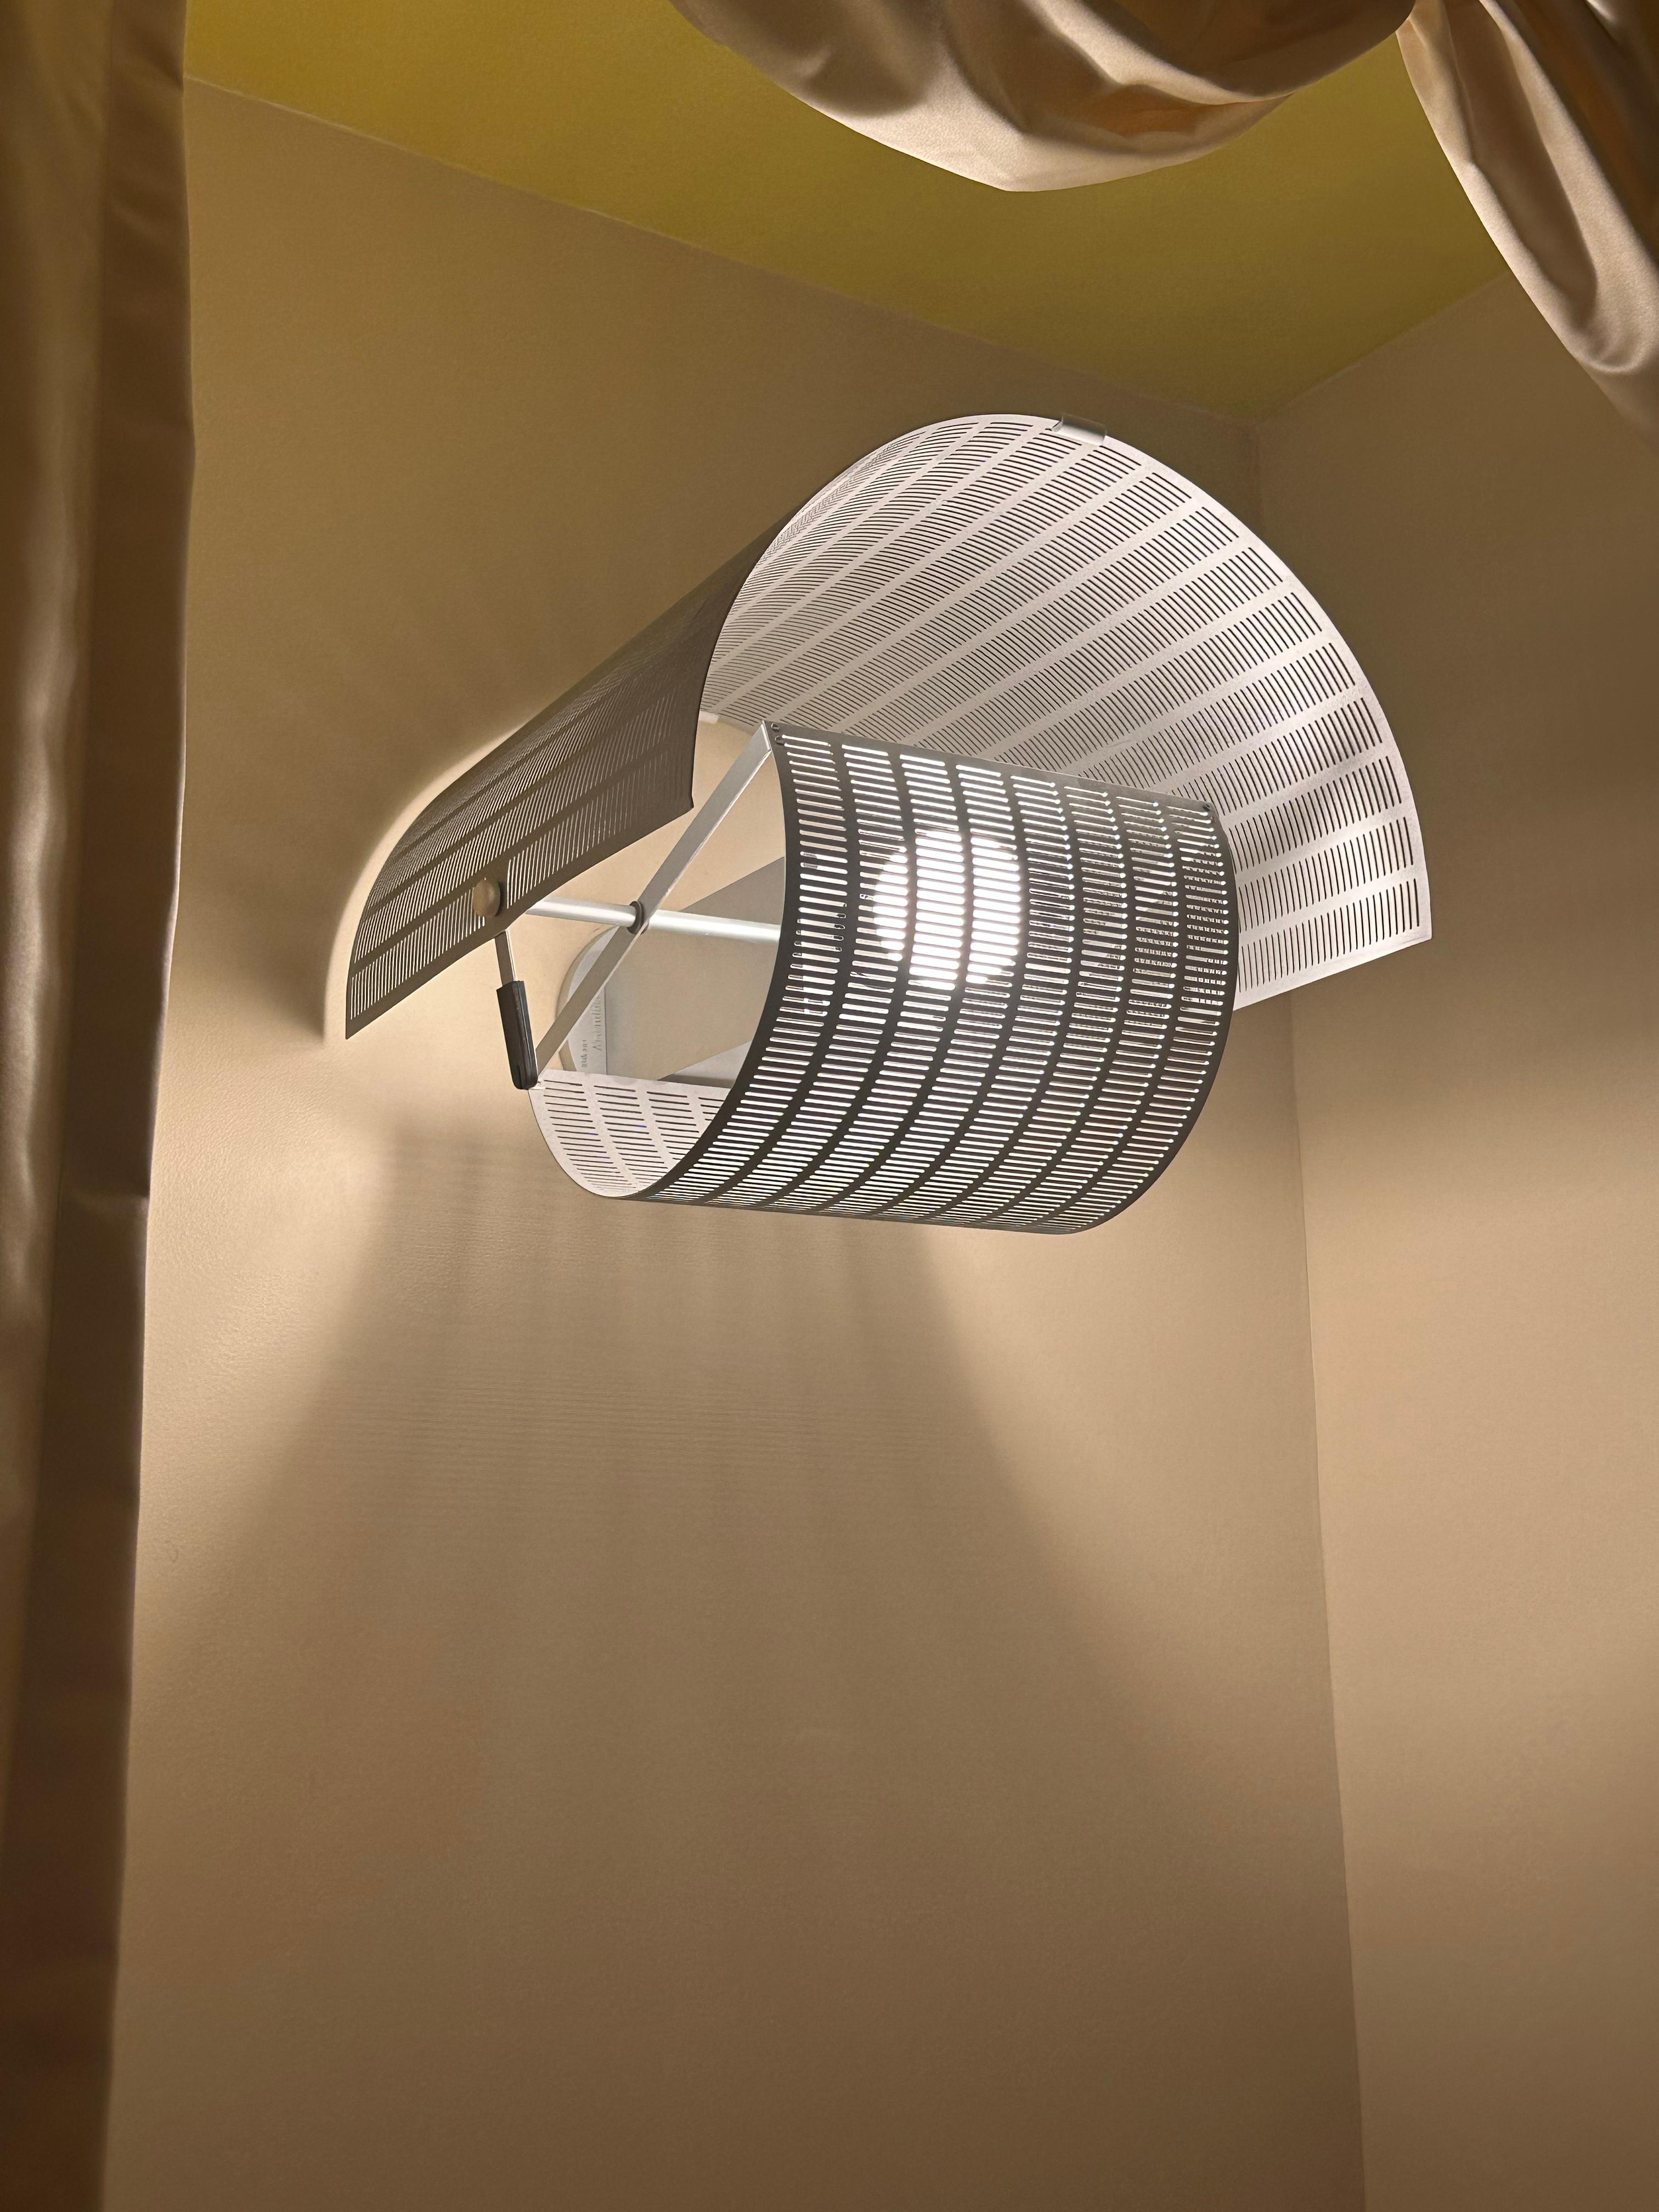 Late 20th Century Mario Botta, Silver Shogun Wall Light Sconce by Artemide, Italy For Sale